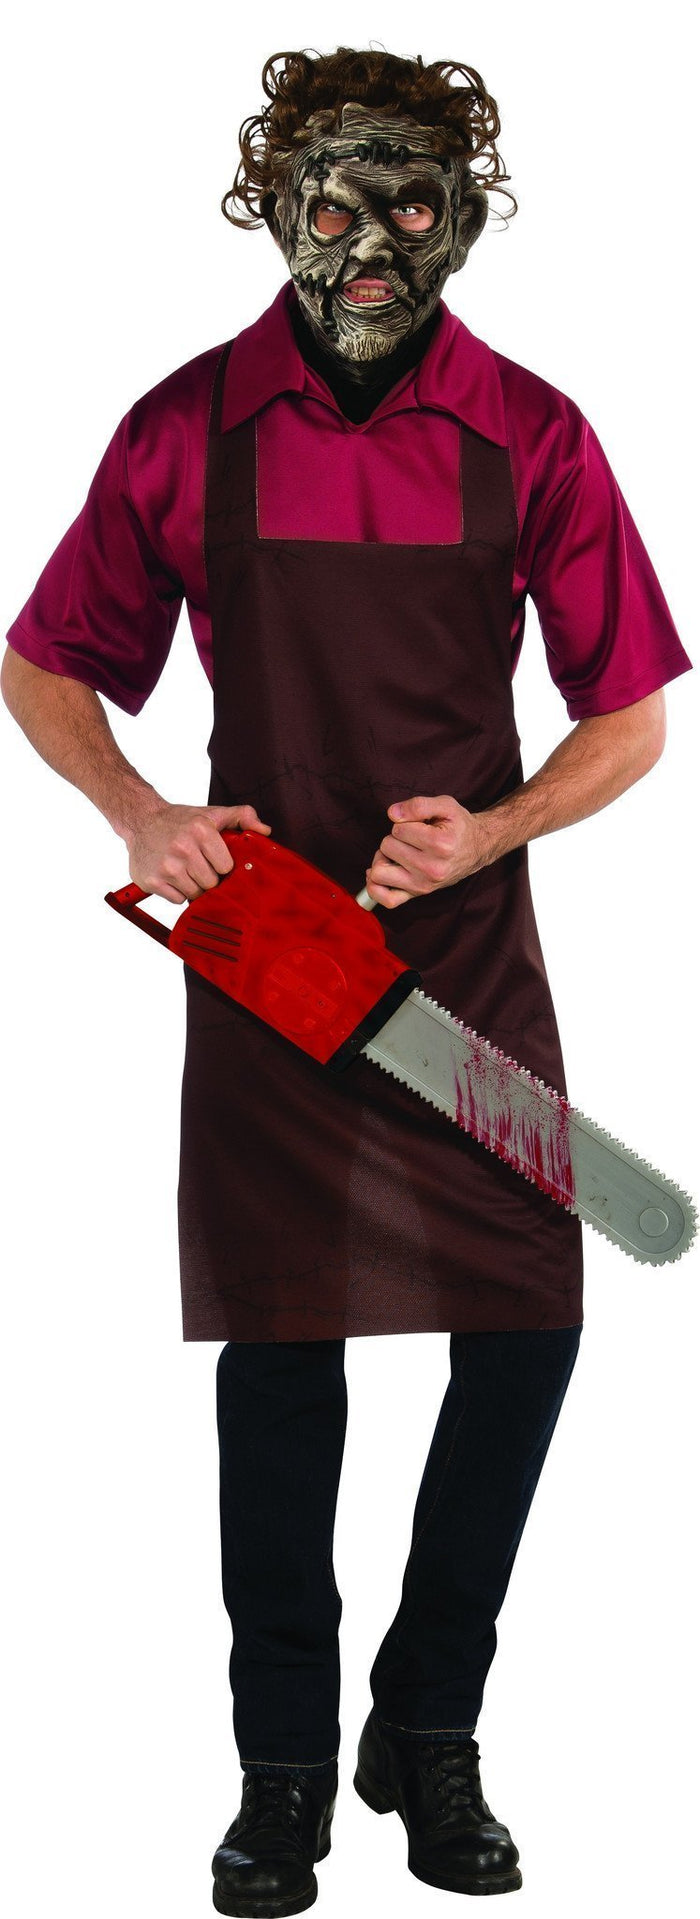 Leatherface Costume for Adults - Texas Chainsaw Massacre